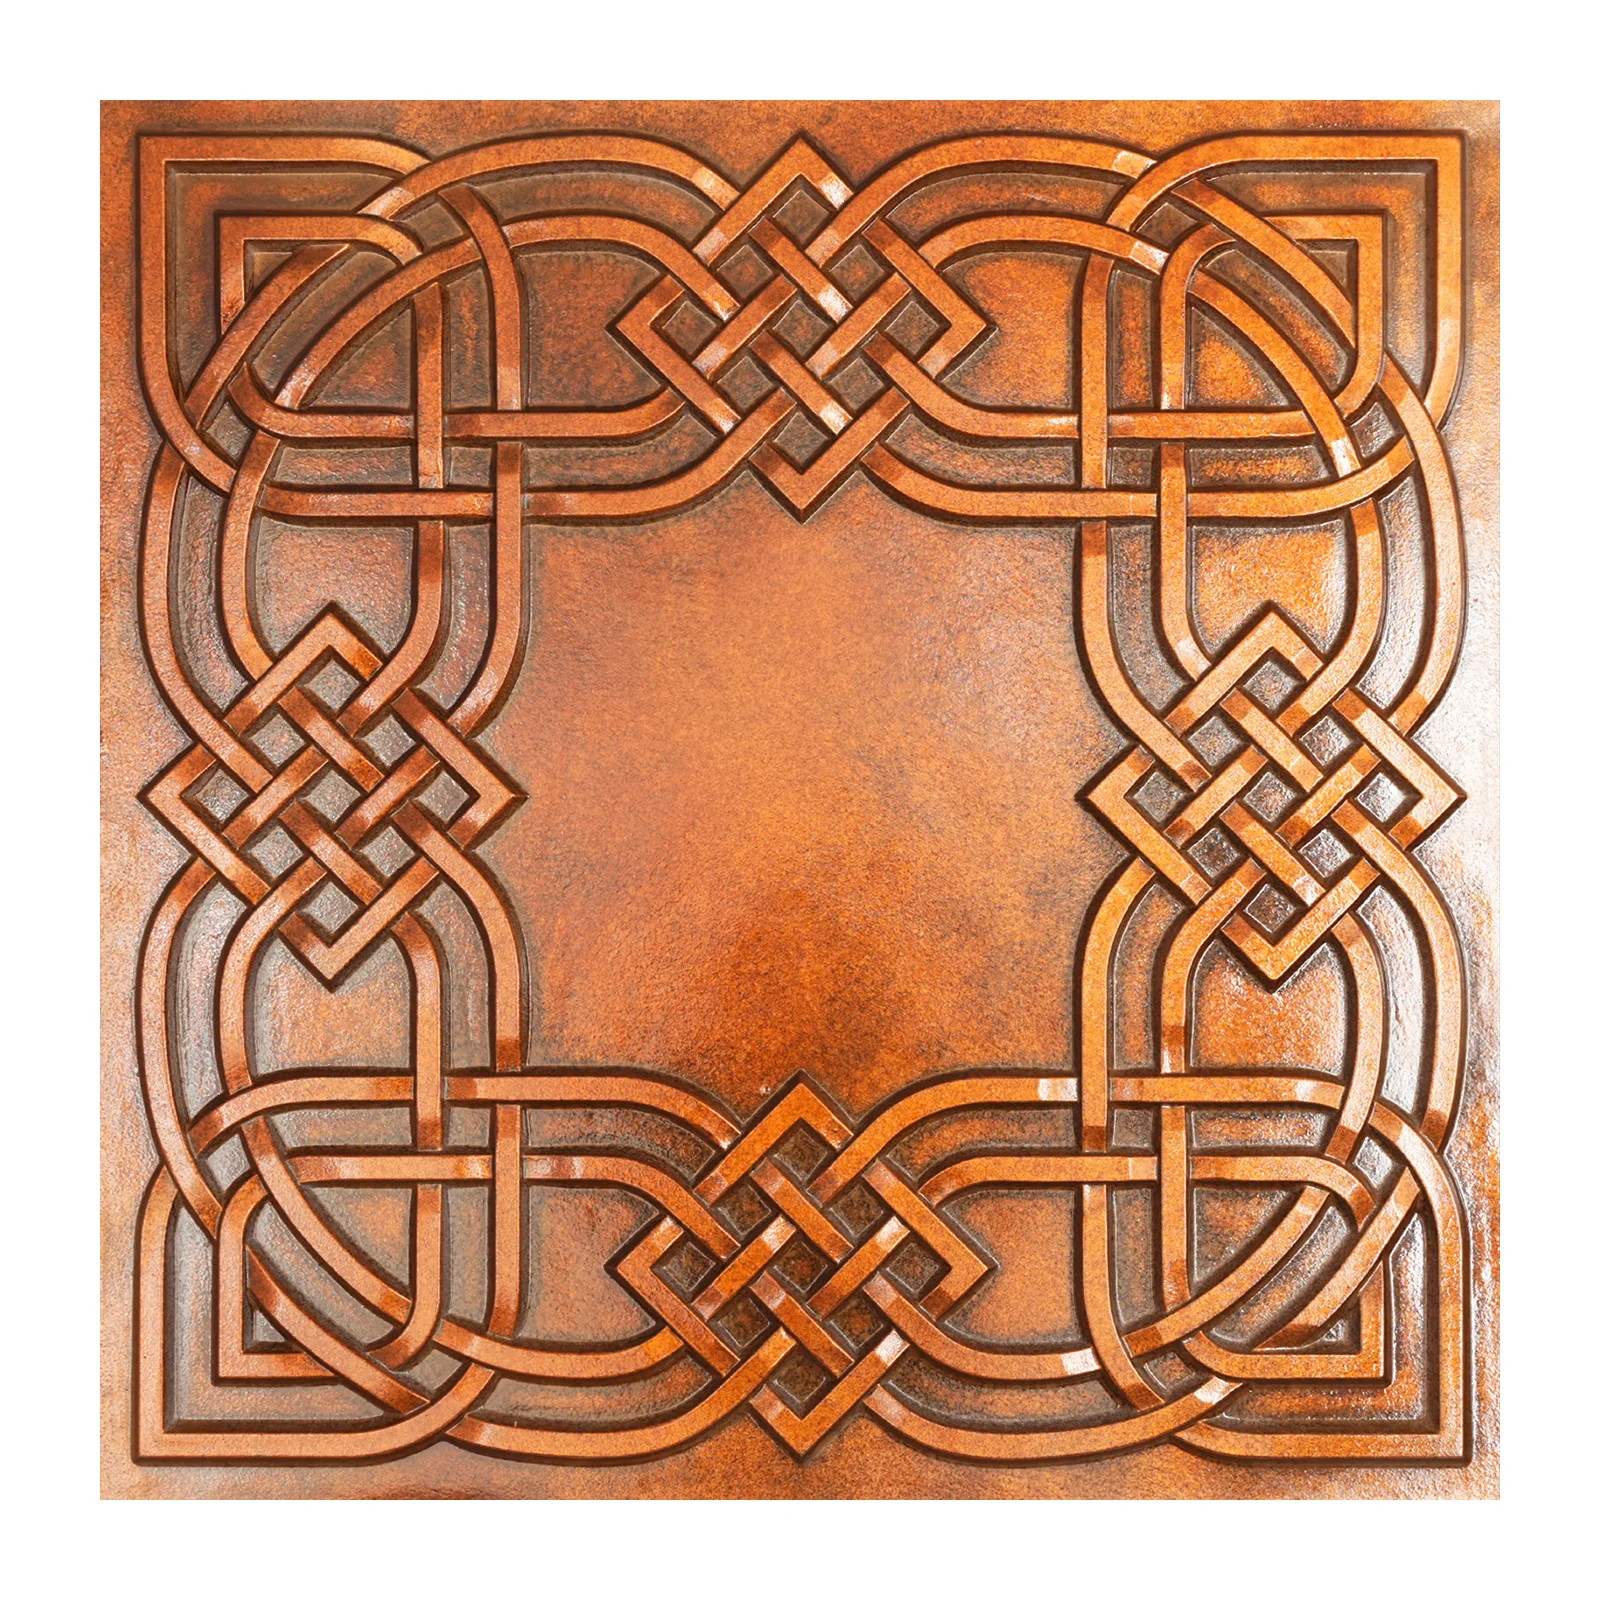 Faux tin ceiling tiles Art style 3D embossing wall panels PL61 archaic copper